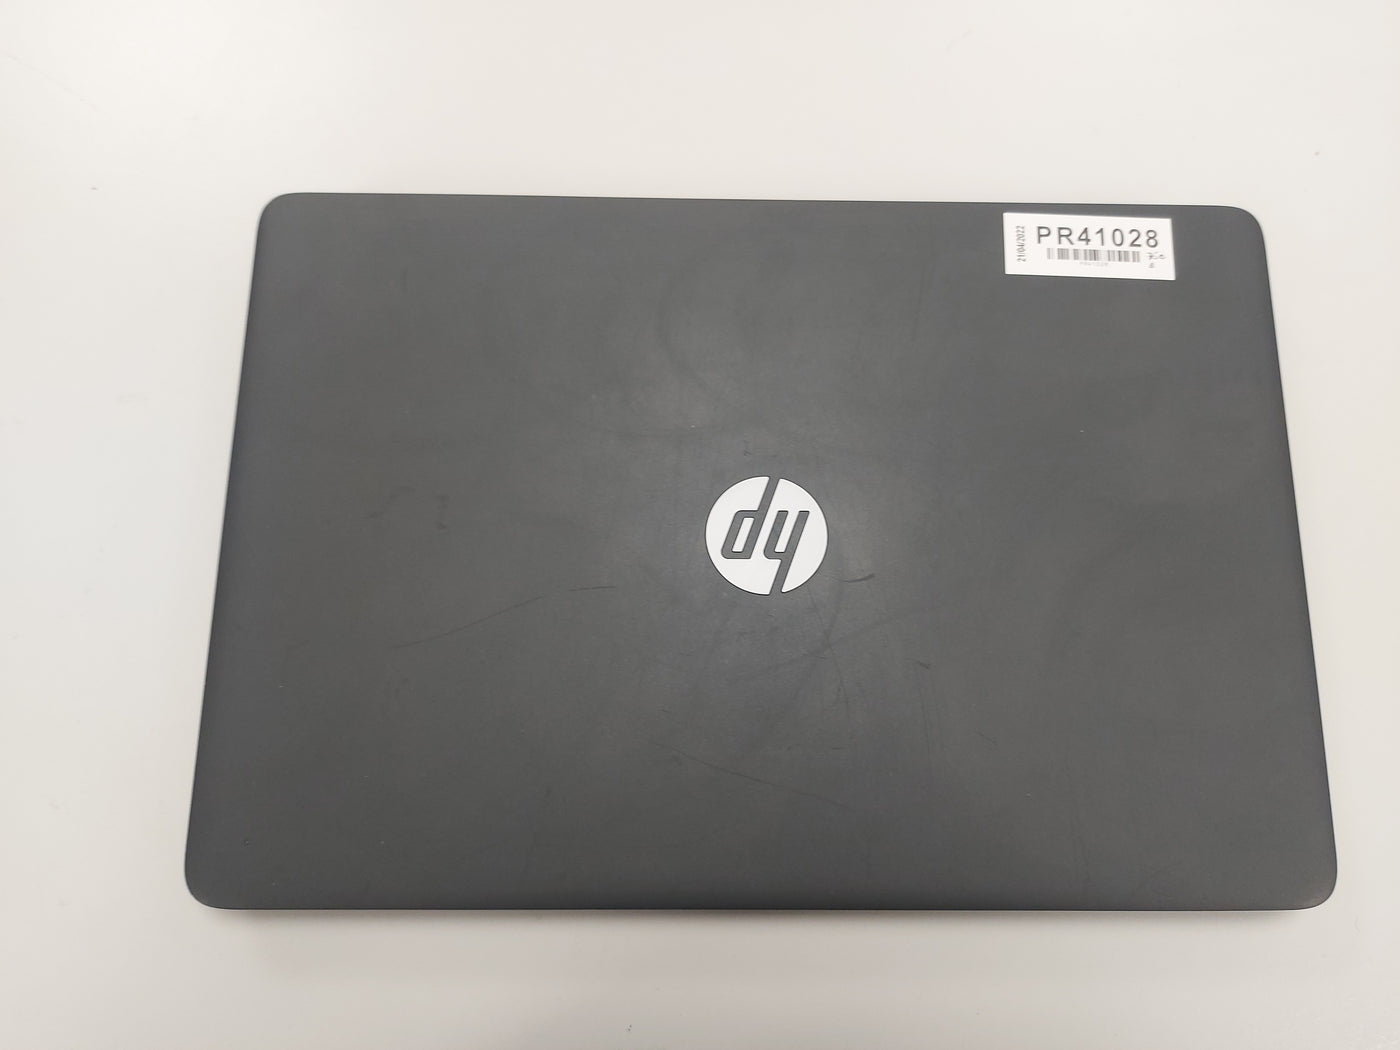 HP ProBook 455 G1 750GB HDD AMD A4-4300M Core 2500MHz 4GB RAM 15.6" Laptop NOT HOLDING CHARGE USED